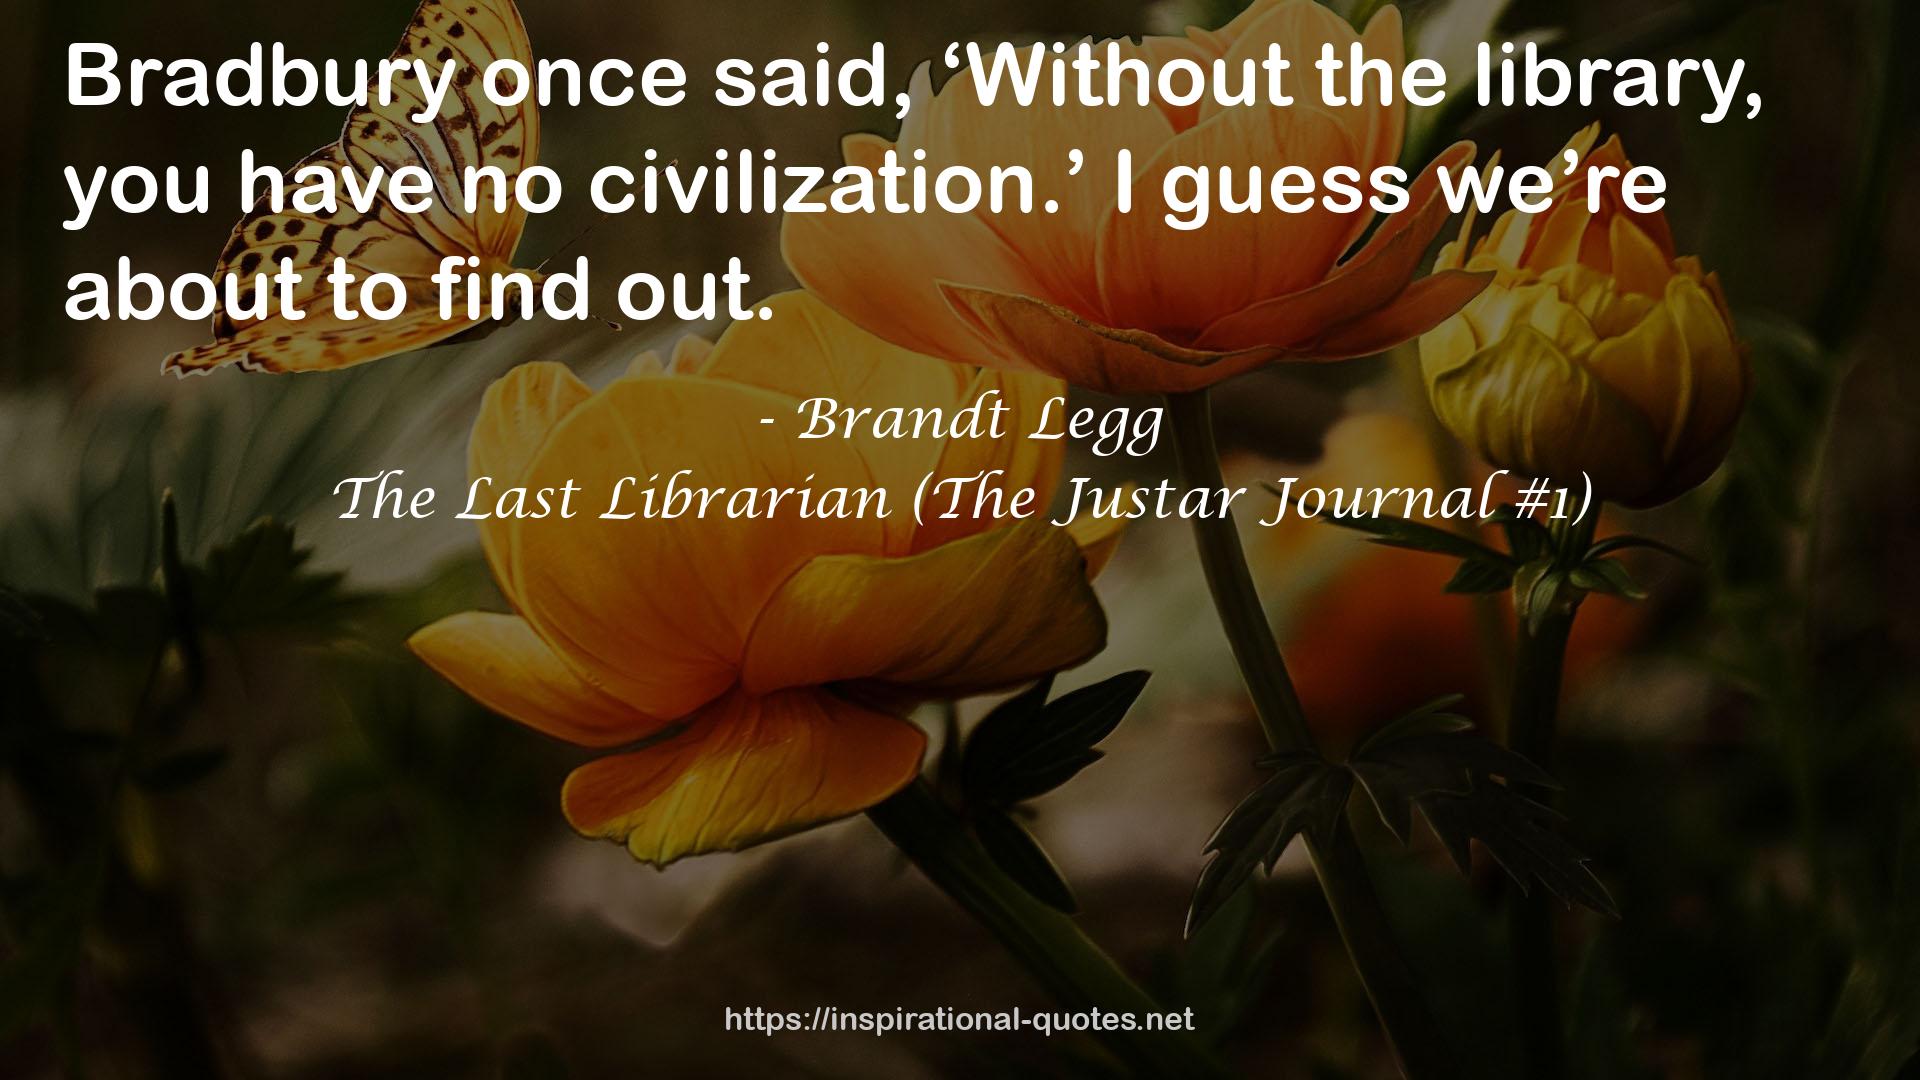 The Last Librarian (The Justar Journal #1) QUOTES